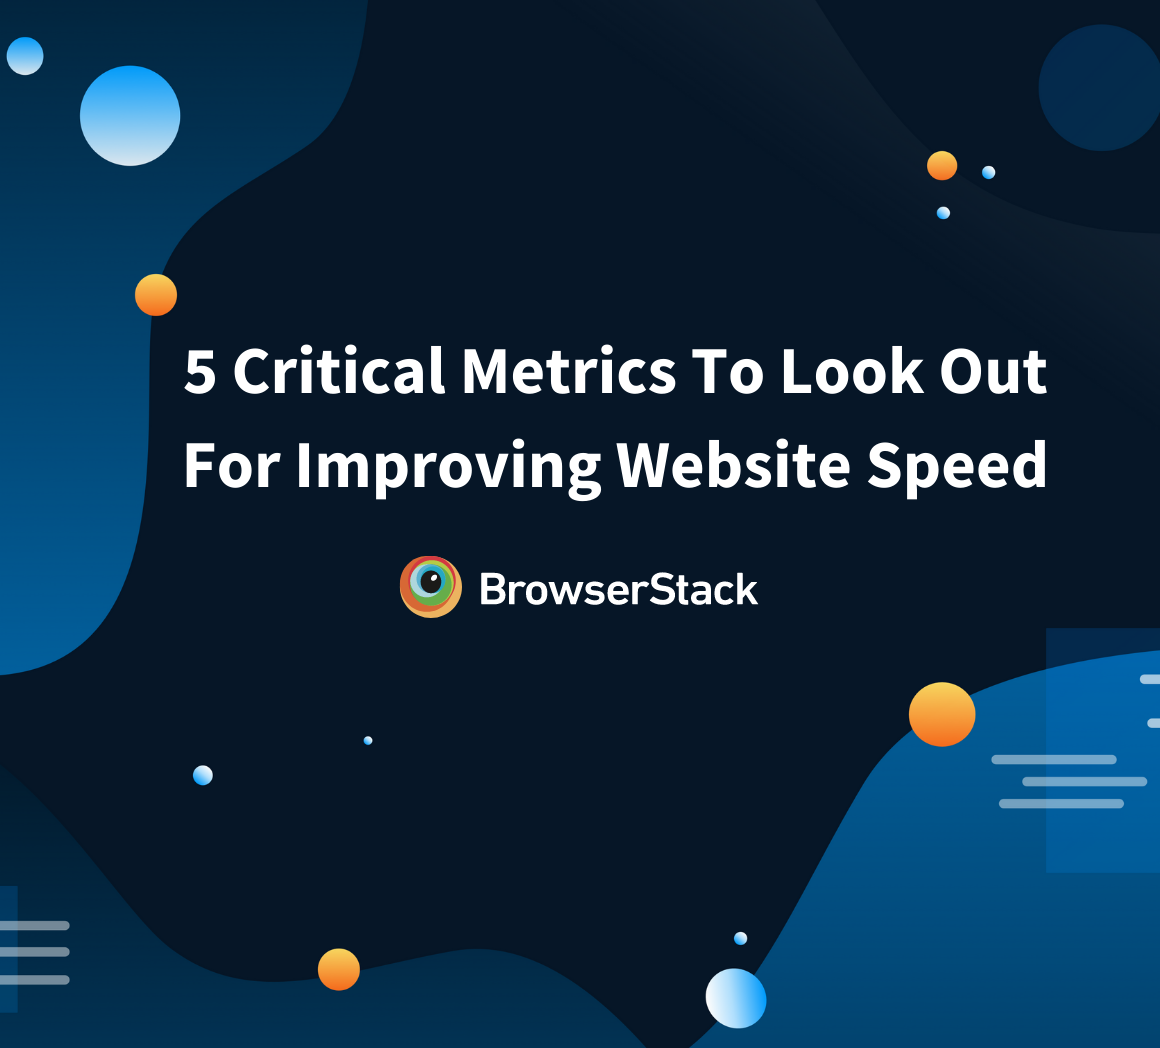 5 Critical Metrics To Look Out For Improving Website Speed